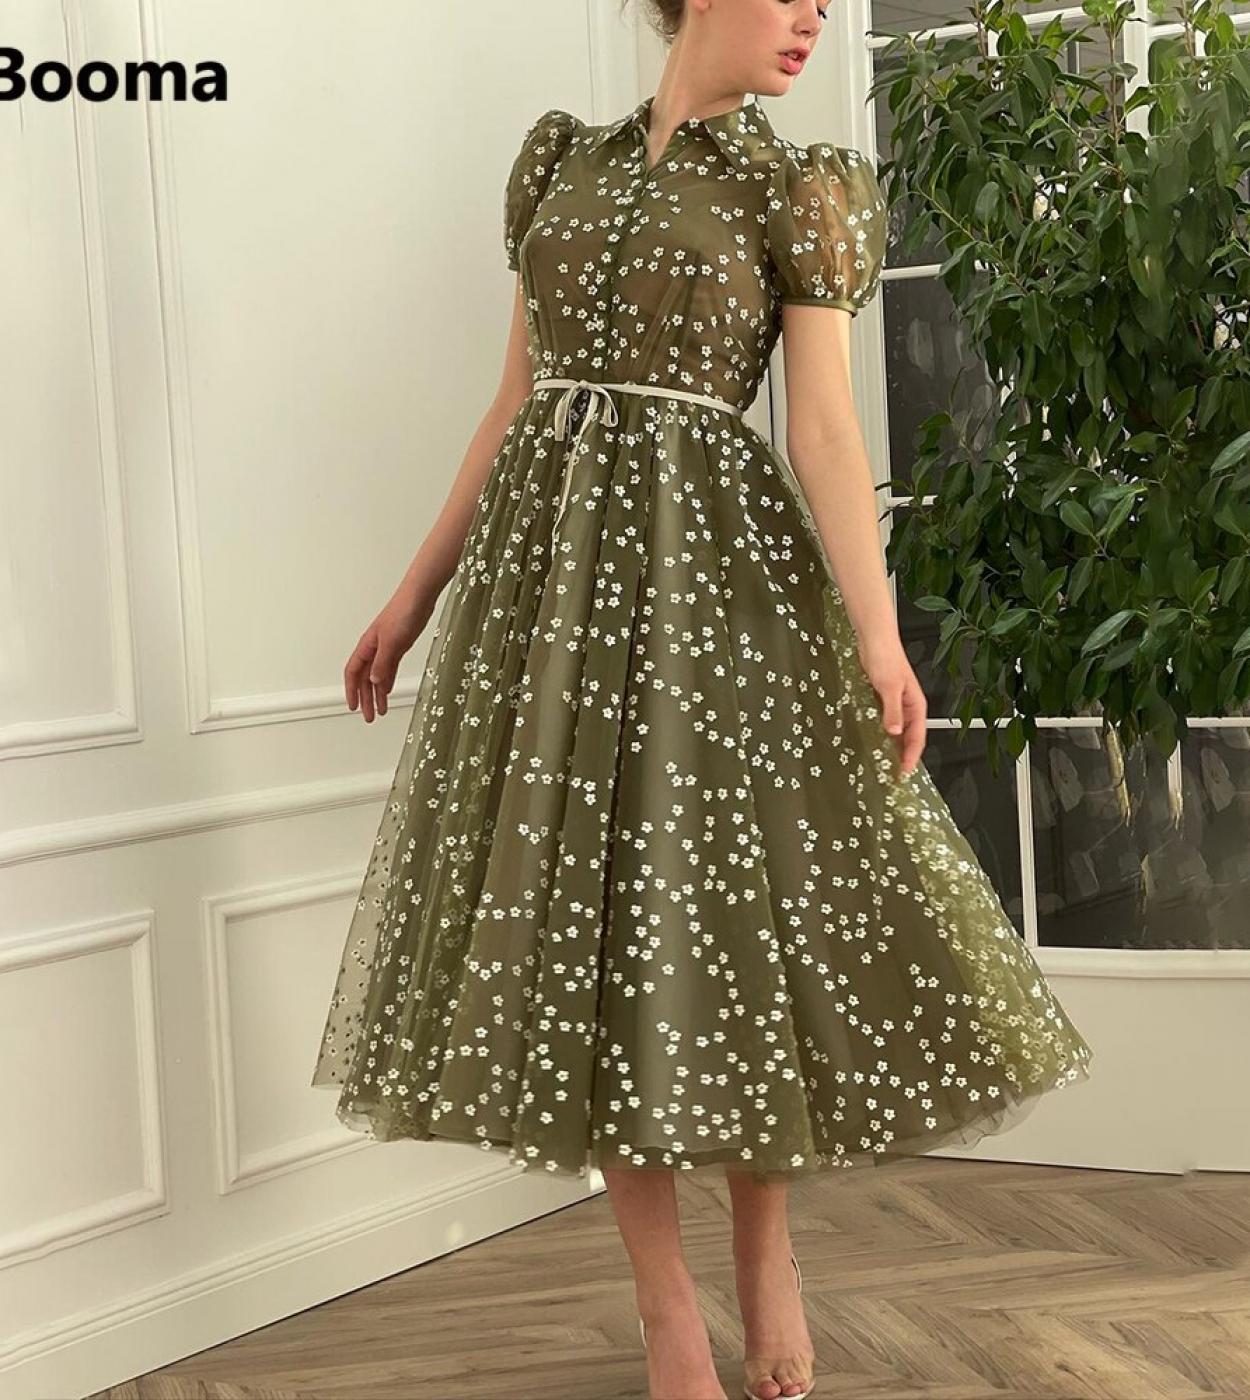 Booma Vintage Green Daisy Tulle Prom Dresses Short Sleeves Buttoned Midi Prom Gowns Ribbons Tea Length Wedding Party Dre